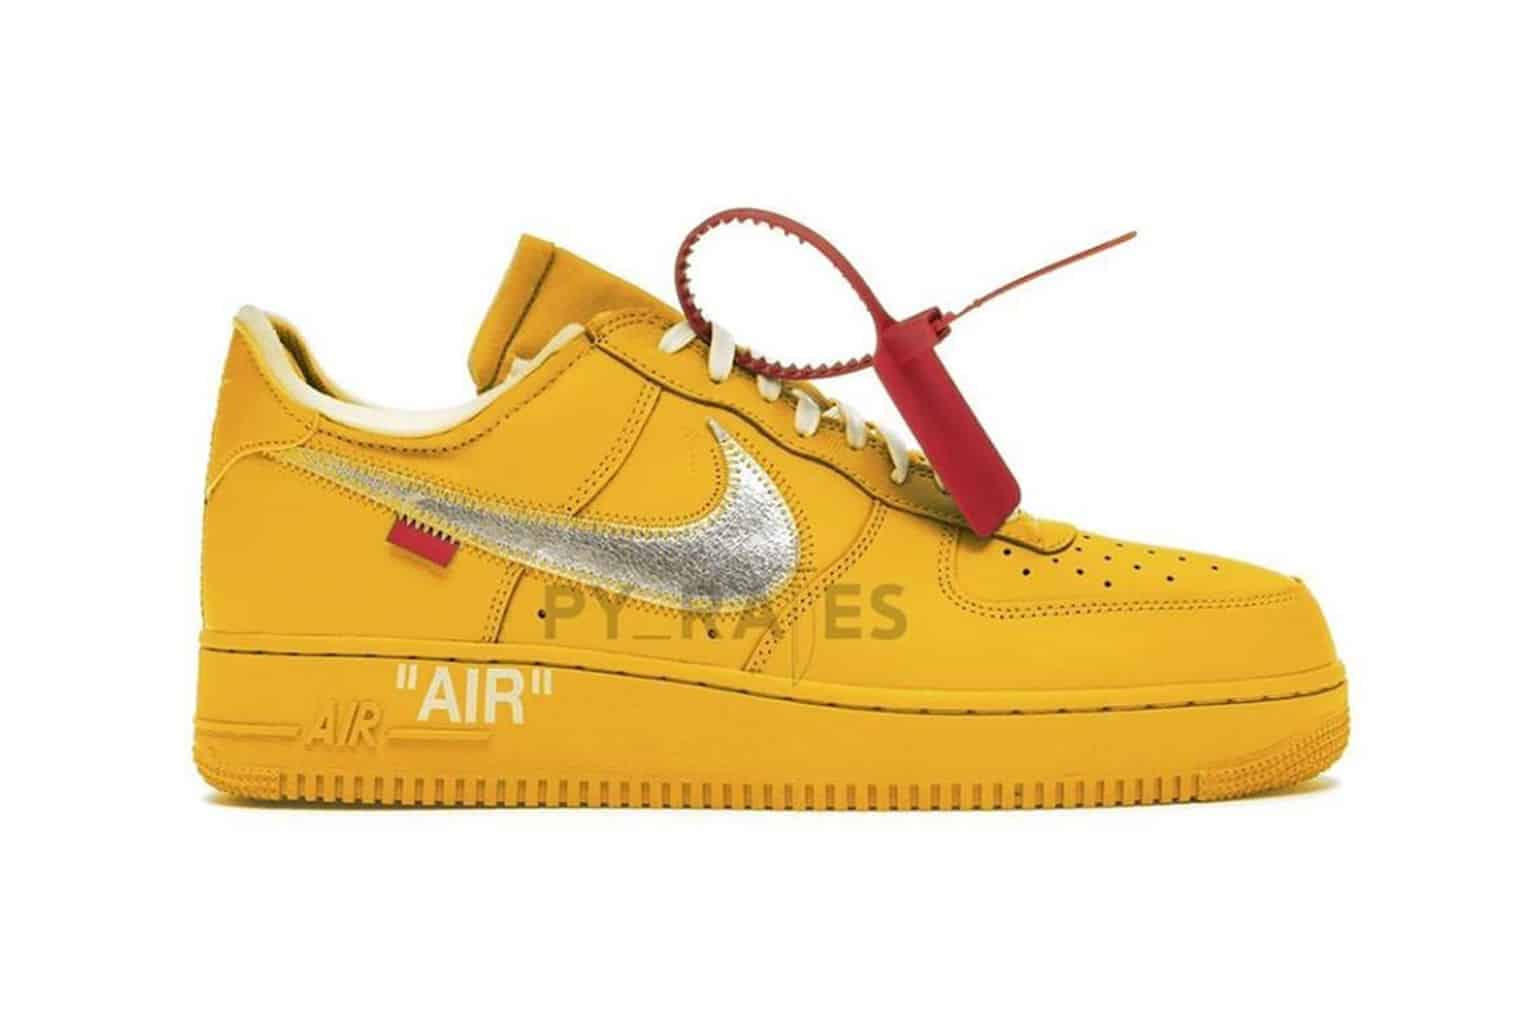 off white air force 1 university gold